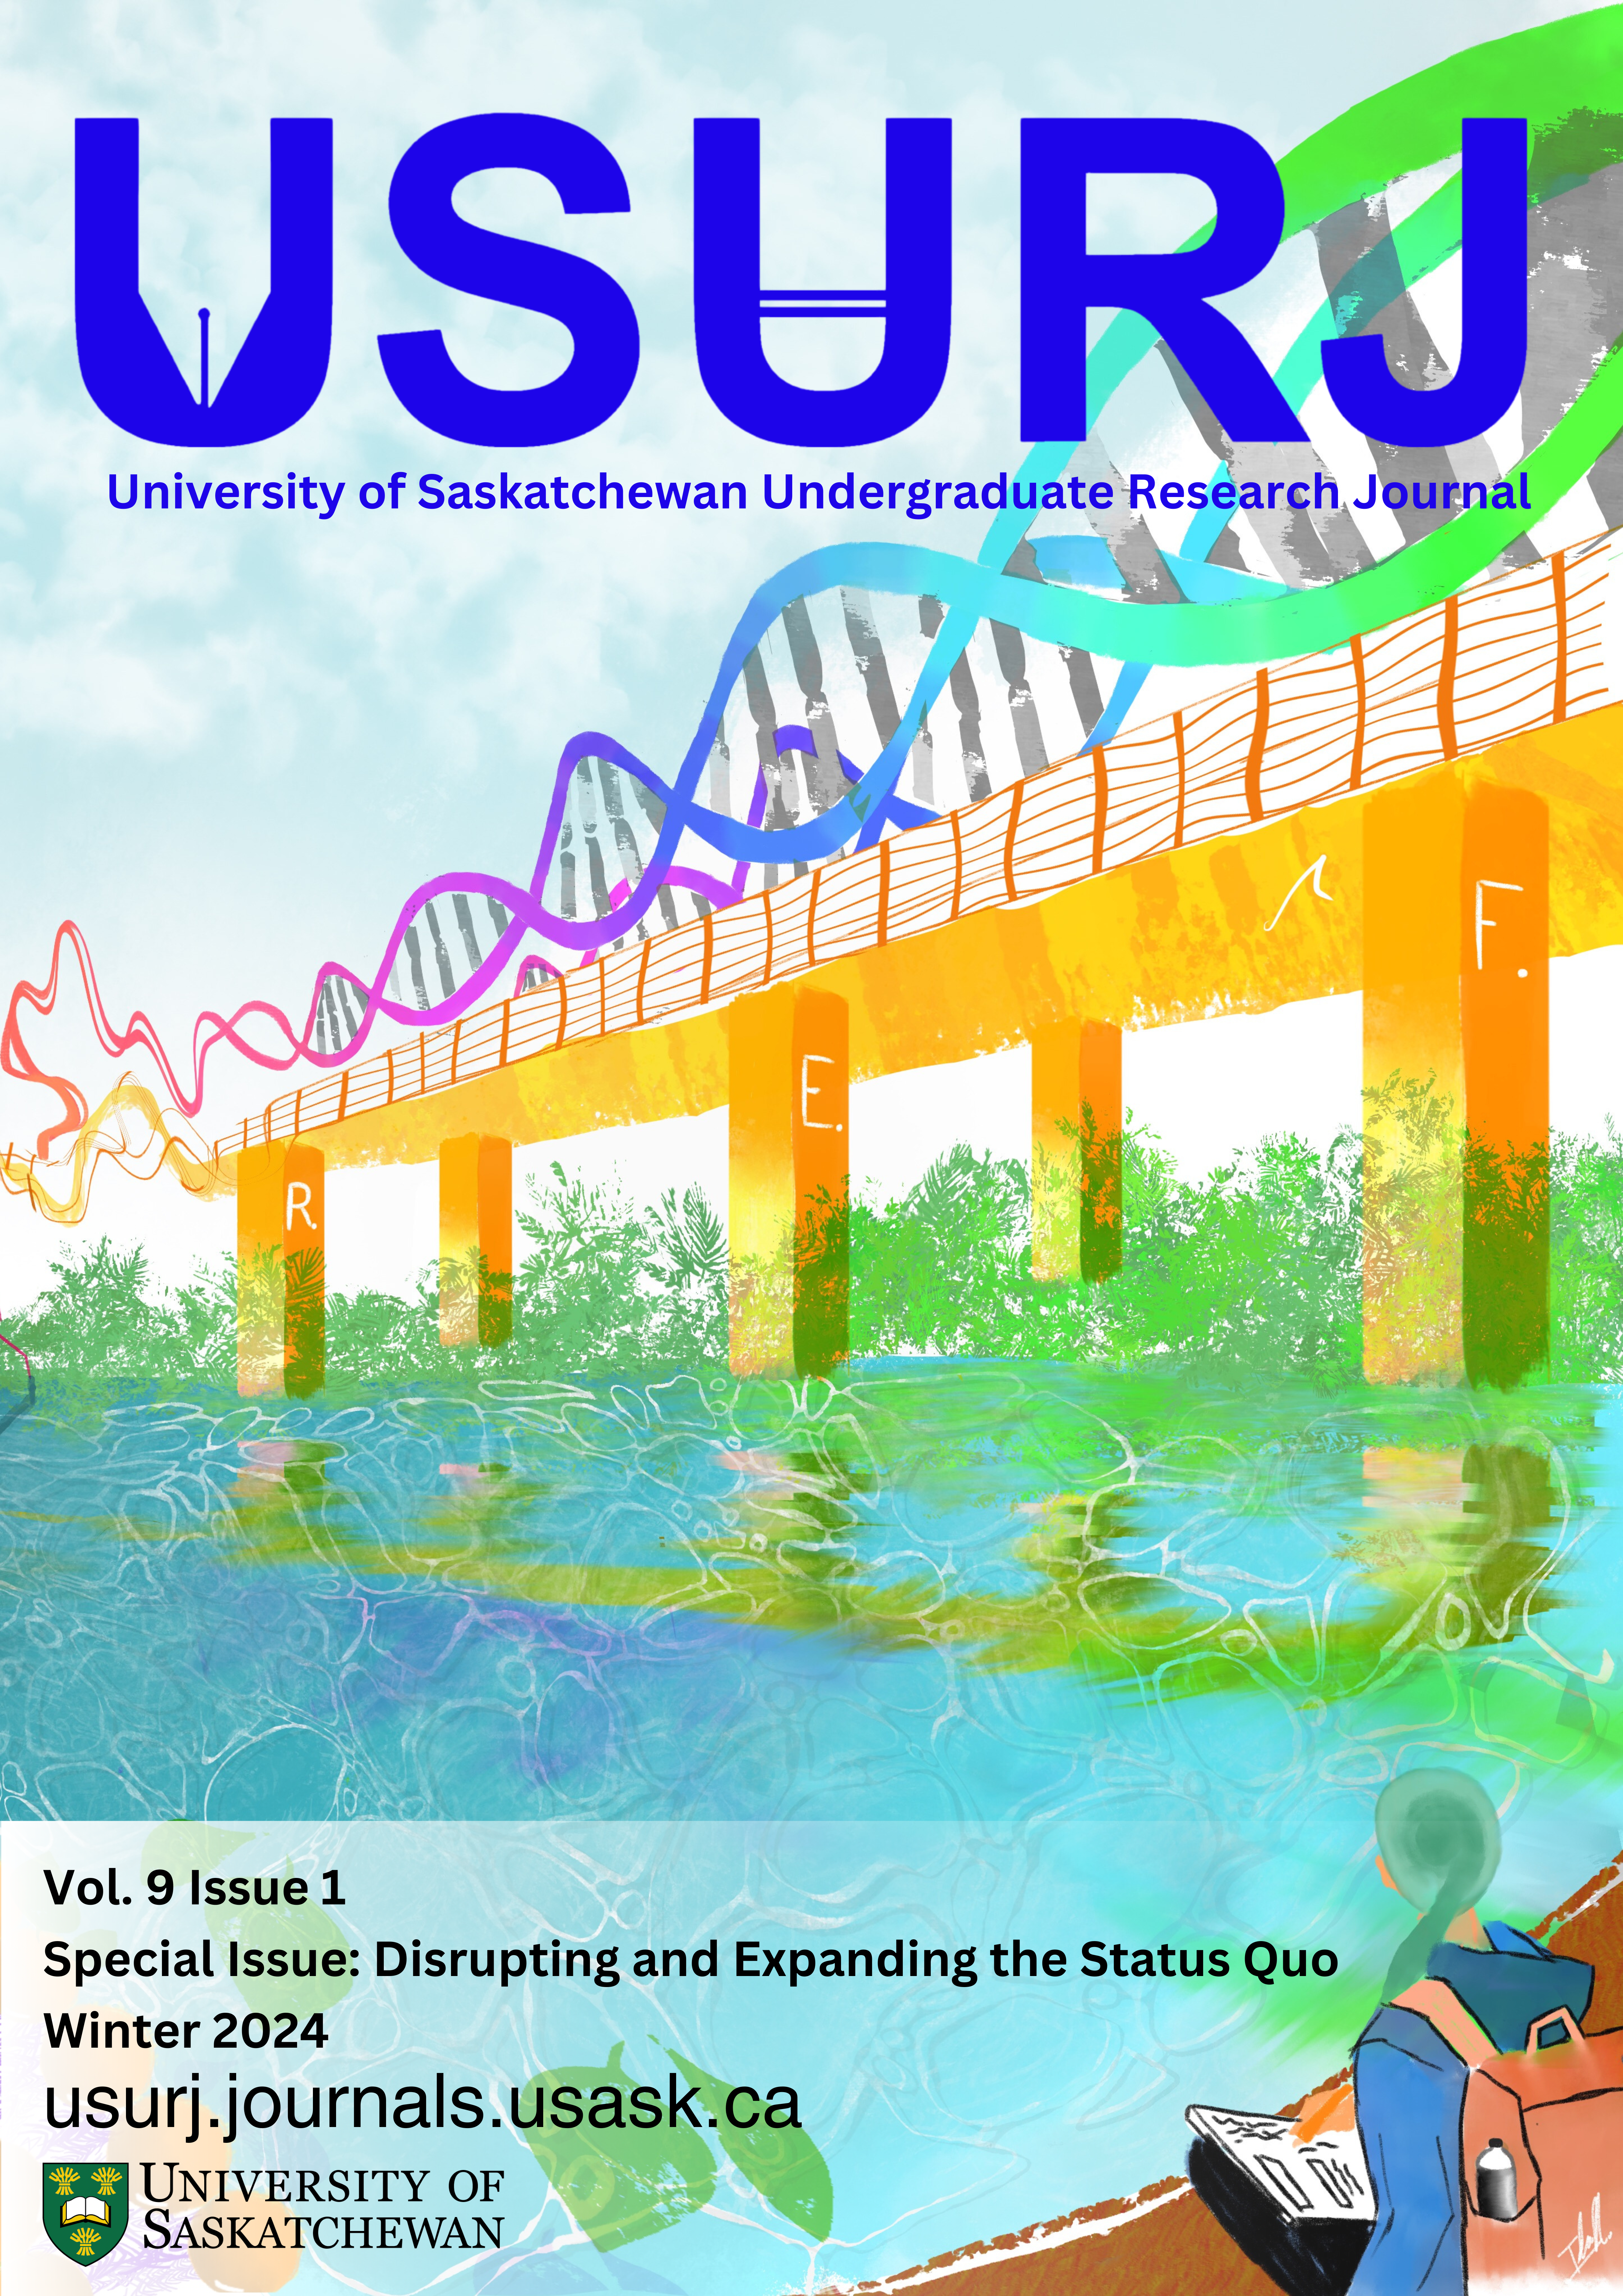 USURJ cover art: a colourful painting of a DNA bridge over a river, initials REF paying homage to Rosalind E. Franklin, duplicating cells in water, bacteriophages, and greenery. The student artist in the bottom right corner of their art piece, with a textbook, looking at the river and bridge. She is wearing a backpack and her hair is tied back in a braid.